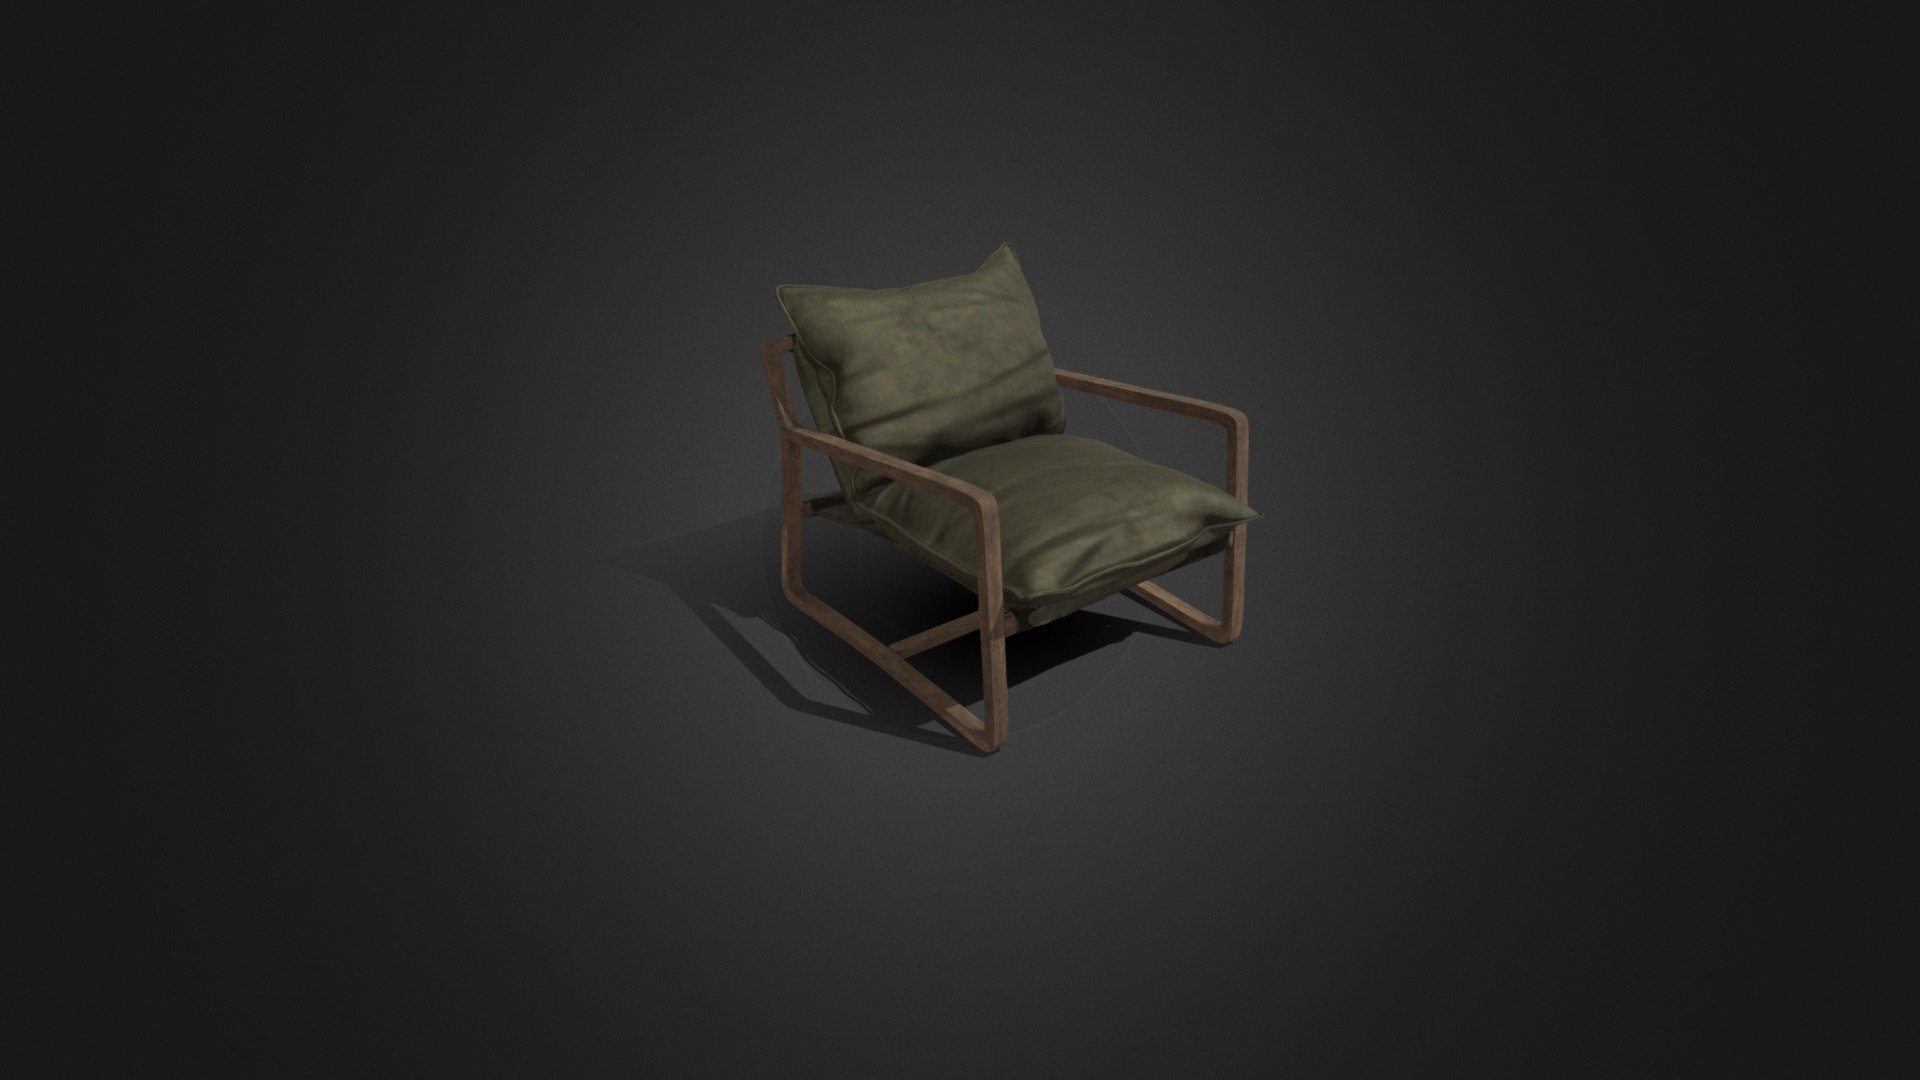 3d model of a Ace Chair. (PBR texture )

This product is made in Blender and ready to render in Cycle. Unit setup is metres and the models are scaled to match real life objects. 

The model comes with textures and materials and is positioned in the center of the coordinates system.


No additional plugin is needed to open the model.




Notes:



Geometry: Polygonal

Textures: Yes 

Rigged: No

Animated: No

UV Mapped: Yes

Unwrapped UVs: Yes, non-overlapping


Bake normal map




Note: don't forget to take a few seconds to rate this product, your support will allow me to continue working .
Thanks in advance for your help and happy blending!




Hope you like it! Thank you!



My youtube channel : https://www.youtube.com/toss90 - Ace Chair - Buy Royalty Free 3D model by Toss90 3d model